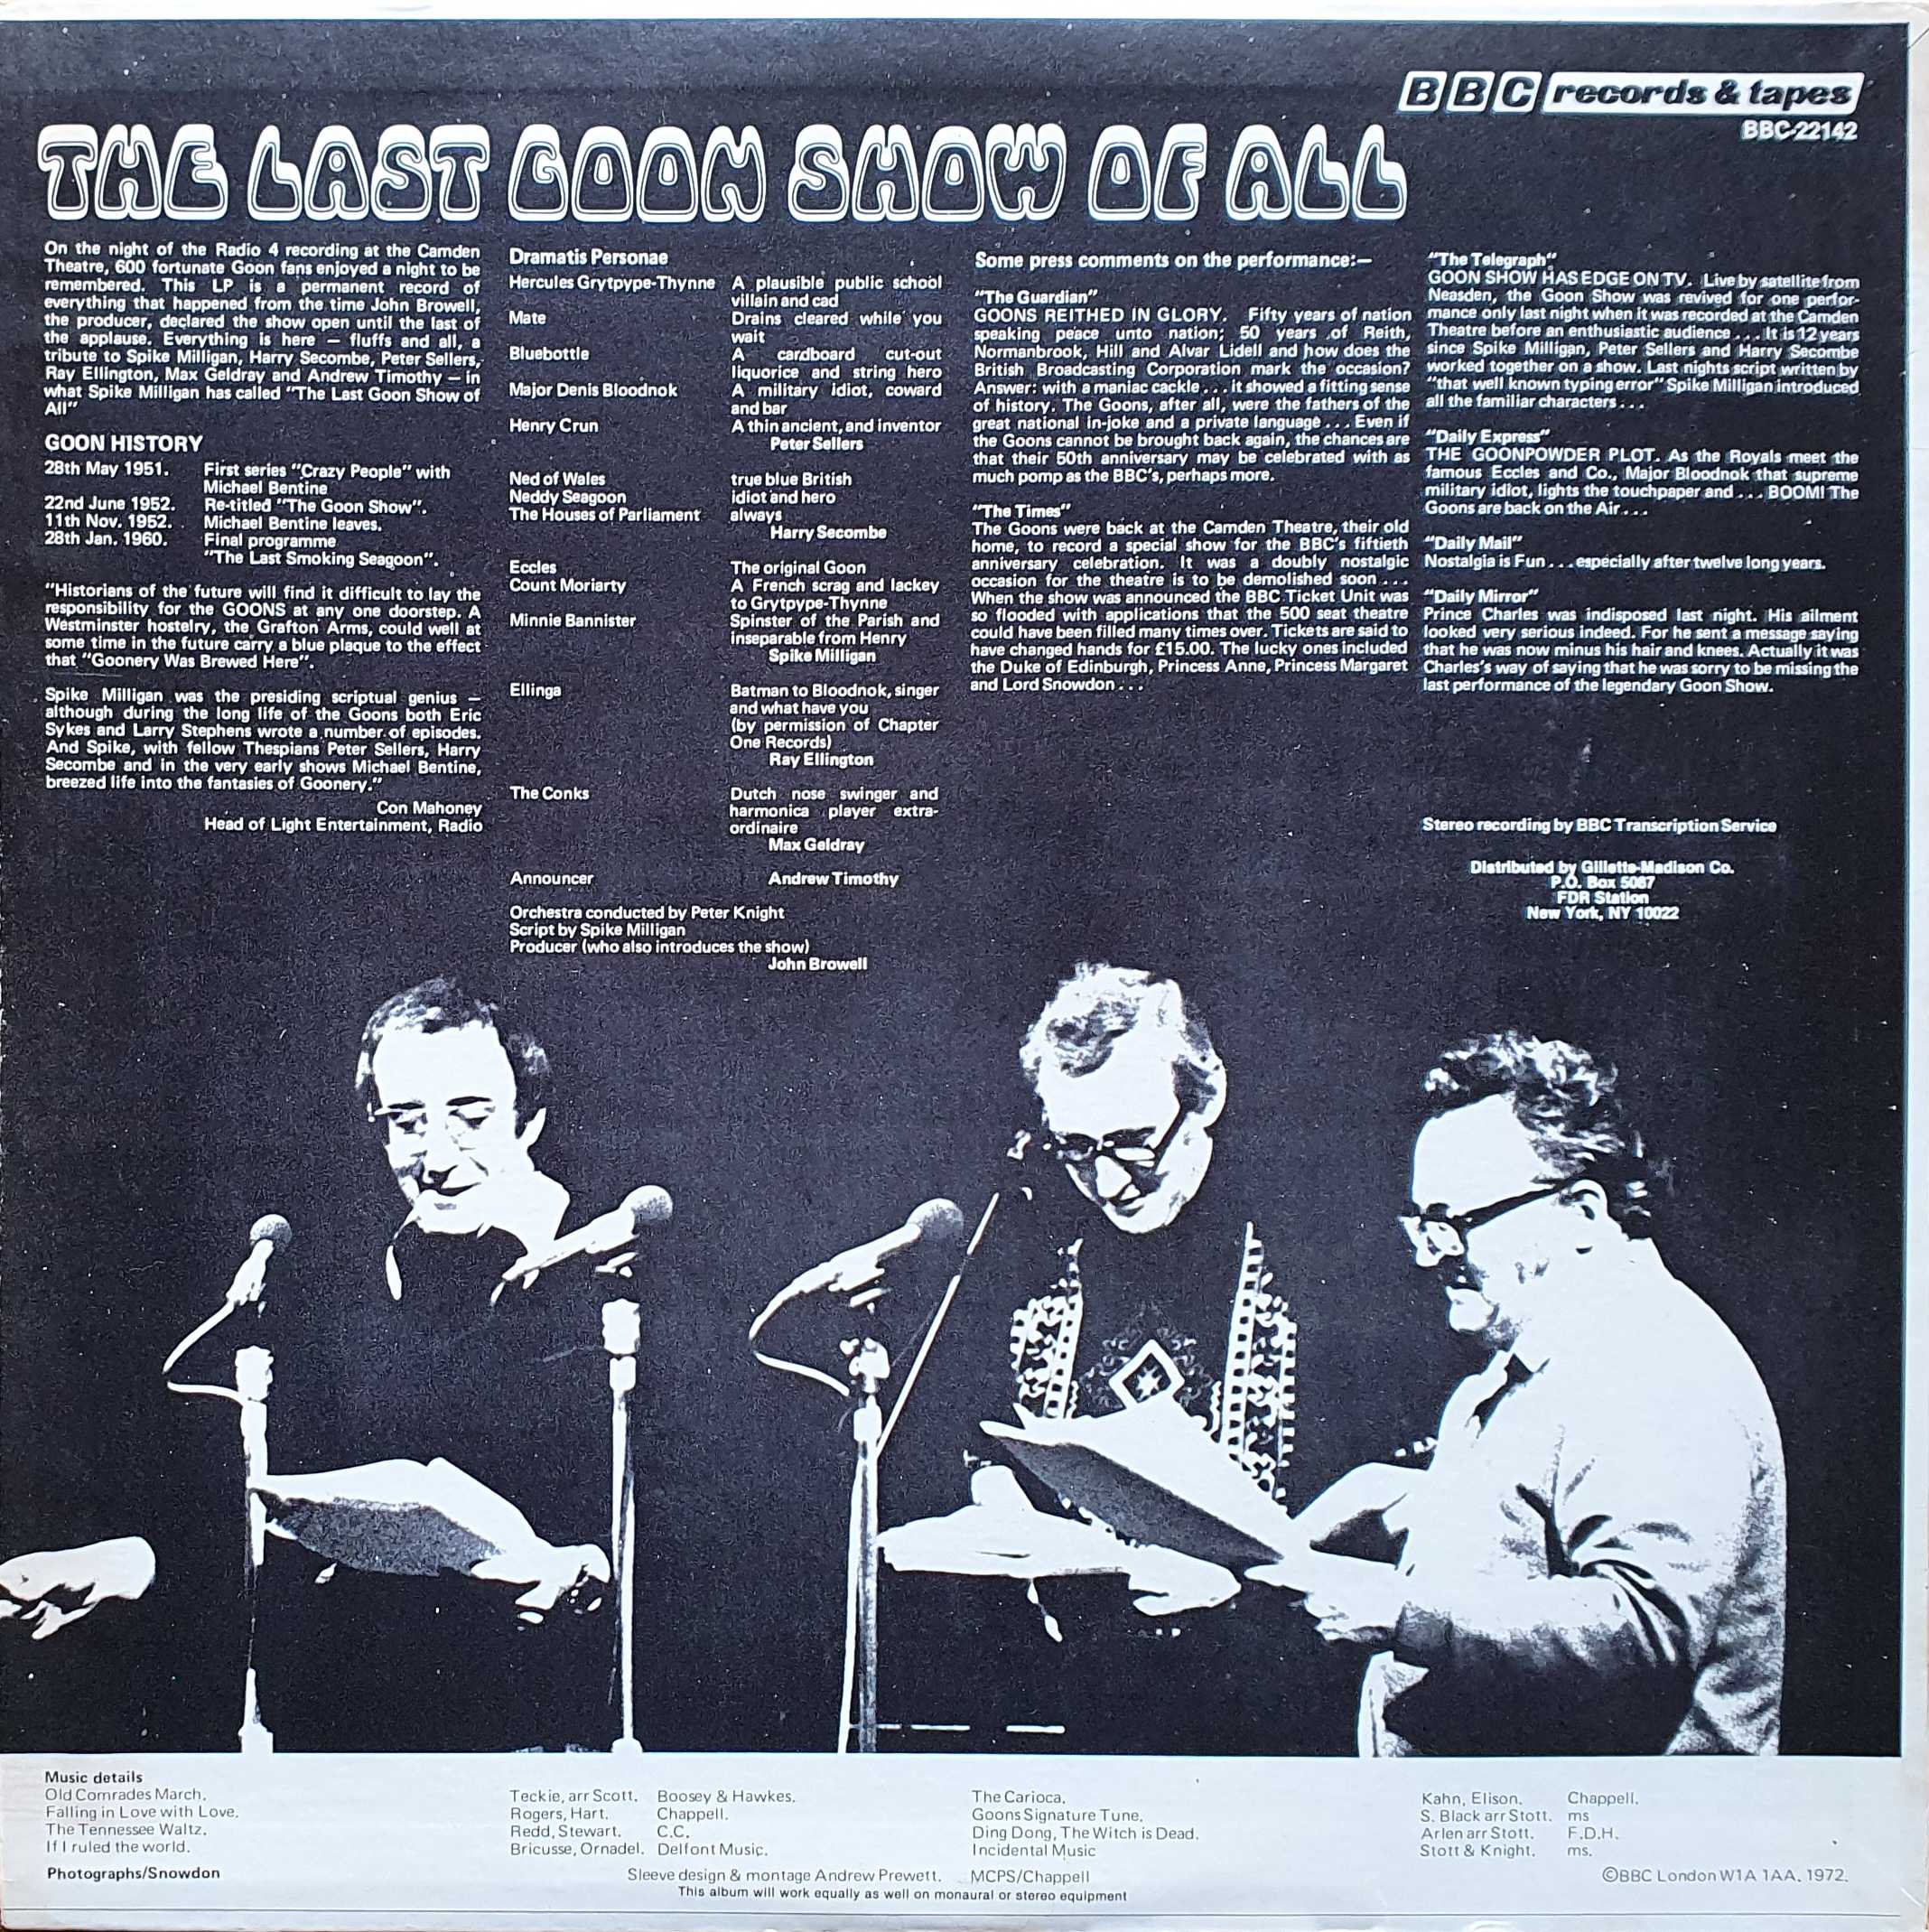 Picture of BBC - 22142 The last Goon show of all by artist Spike Milligan from the BBC records and Tapes library